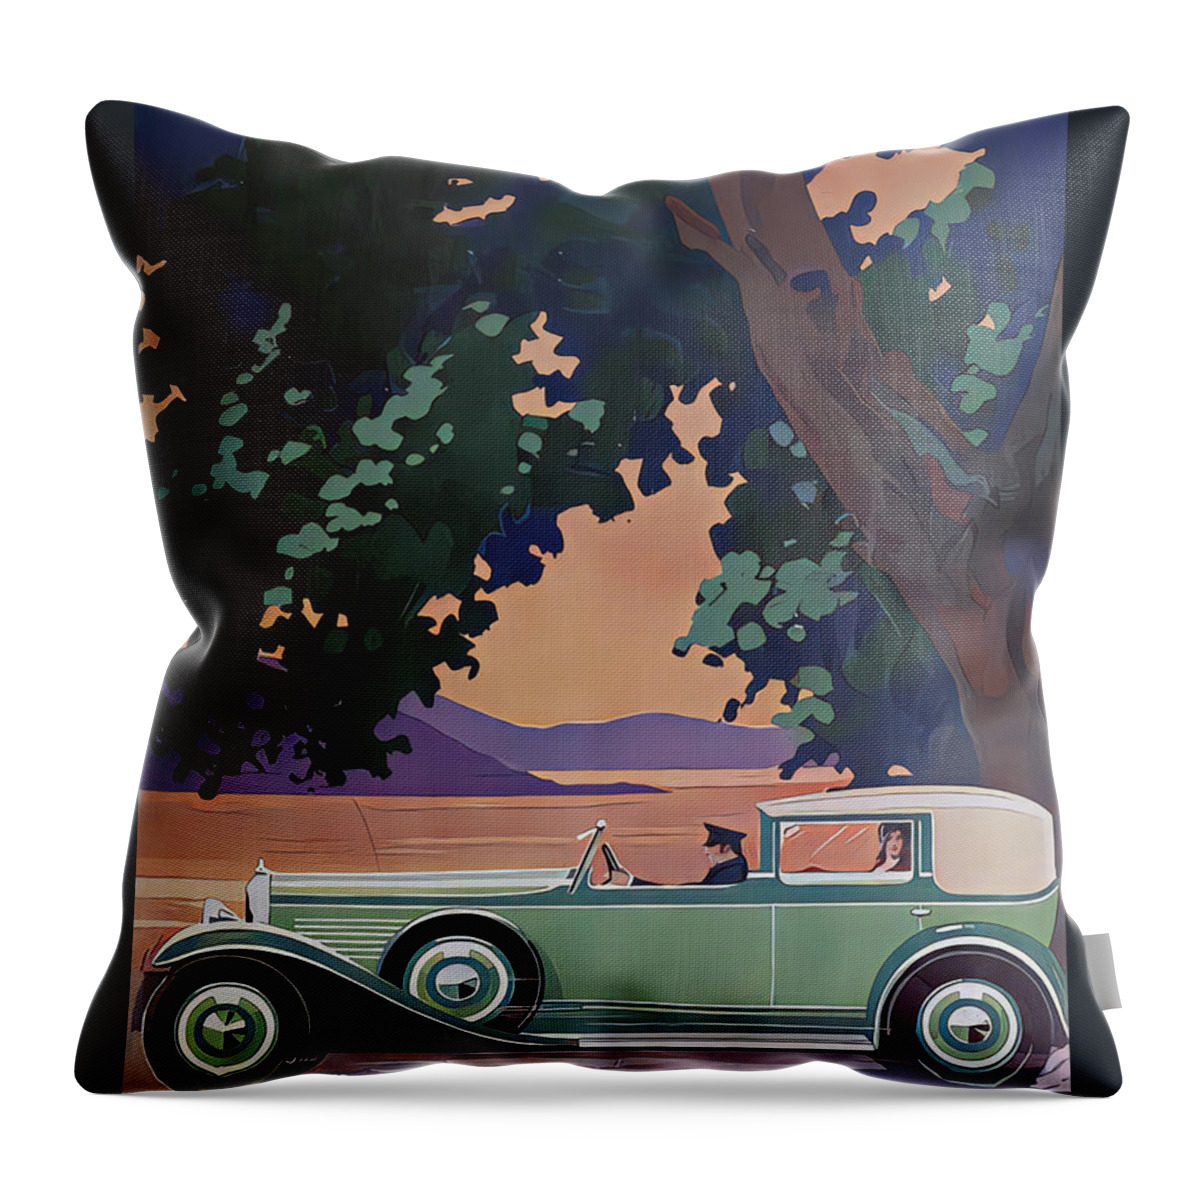 Vintage Throw Pillow featuring the mixed media 1931 Town Car With Driver And Occupants Lakeside Setting Original French Art Deco Illustration by Retrographs